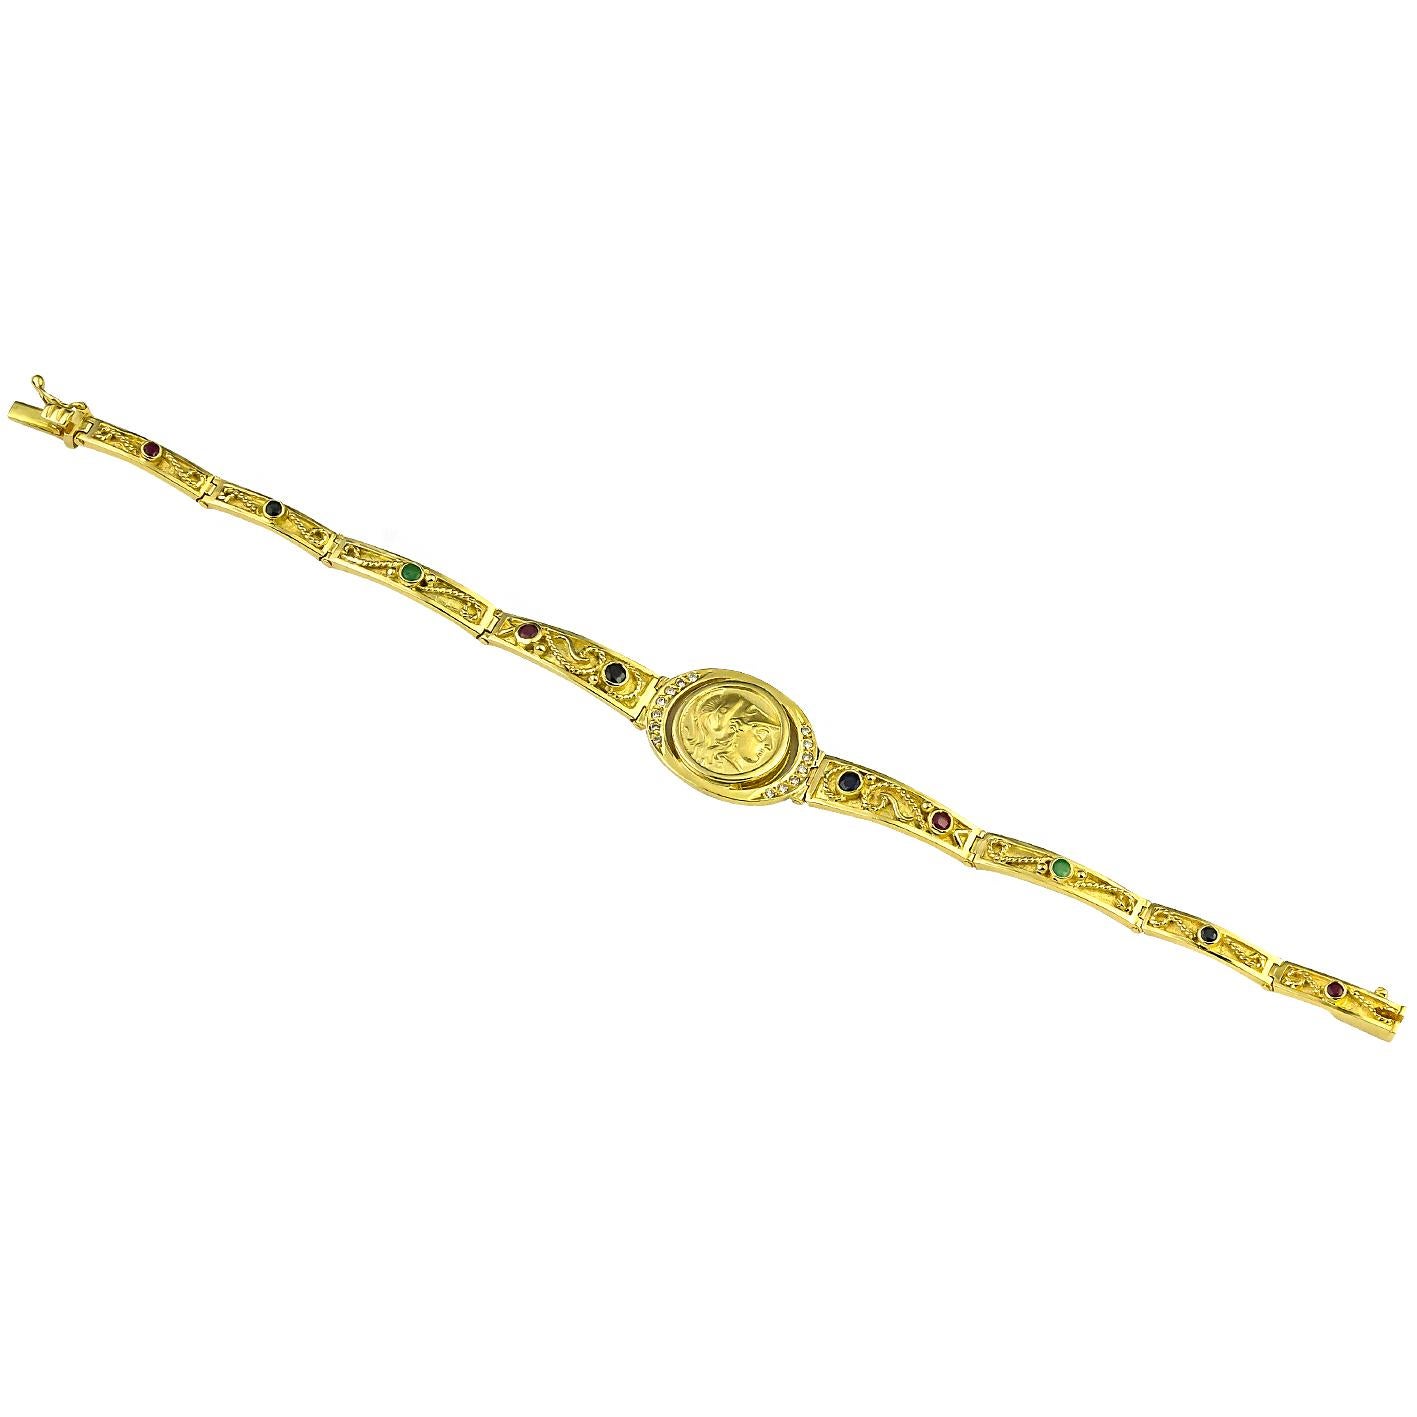 This S.Georgios Athena Coin Diamond Bracelet is handmade from solid 18 Karat Yellow Gold and is microscopically decorated with granulation - yellow gold beads and wires. Granulated details contrast with a Byzantine velvet background. This unique